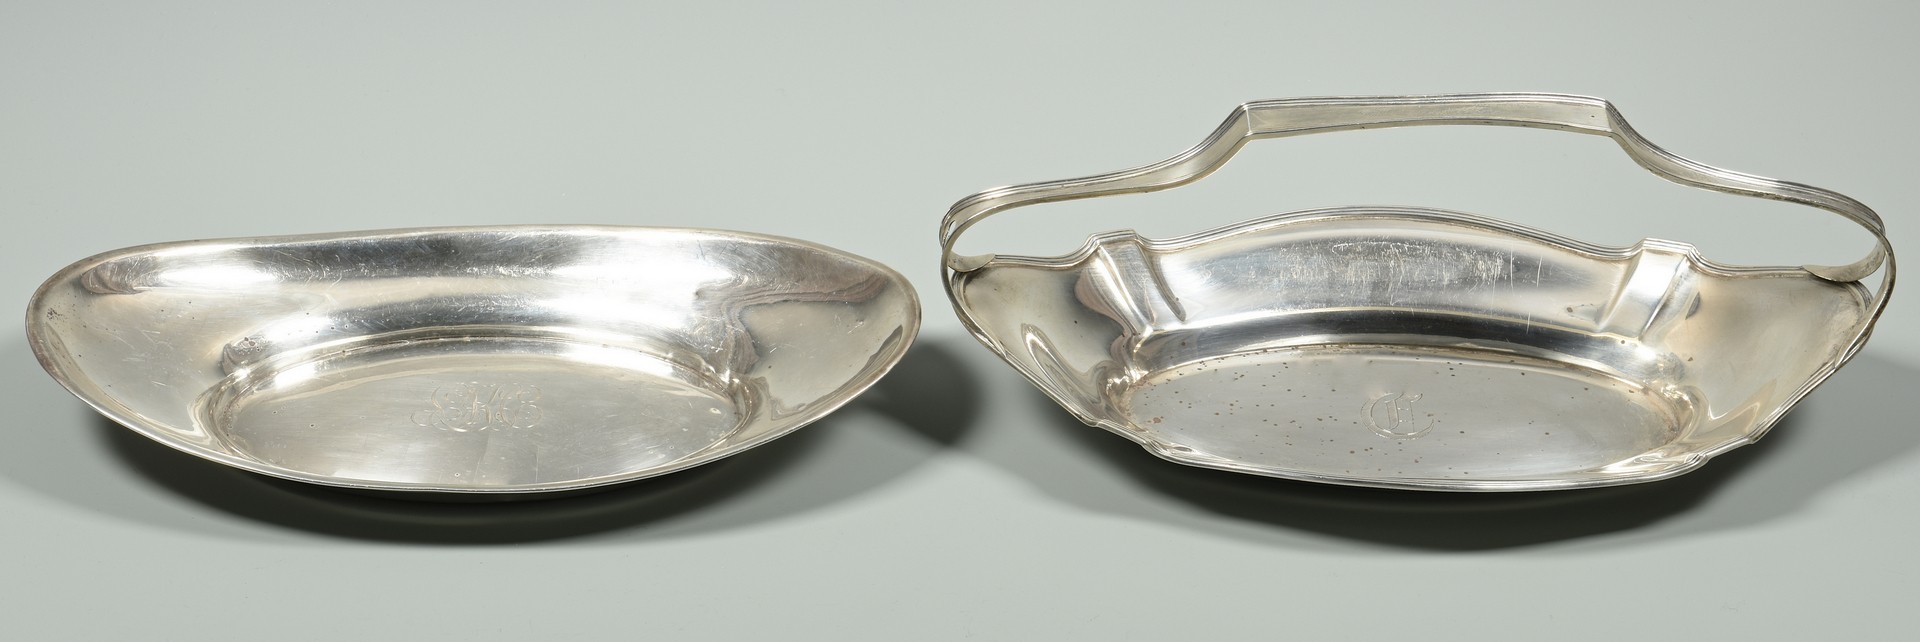 Lot 872: Sterling bread trays, sauce boat and flatware